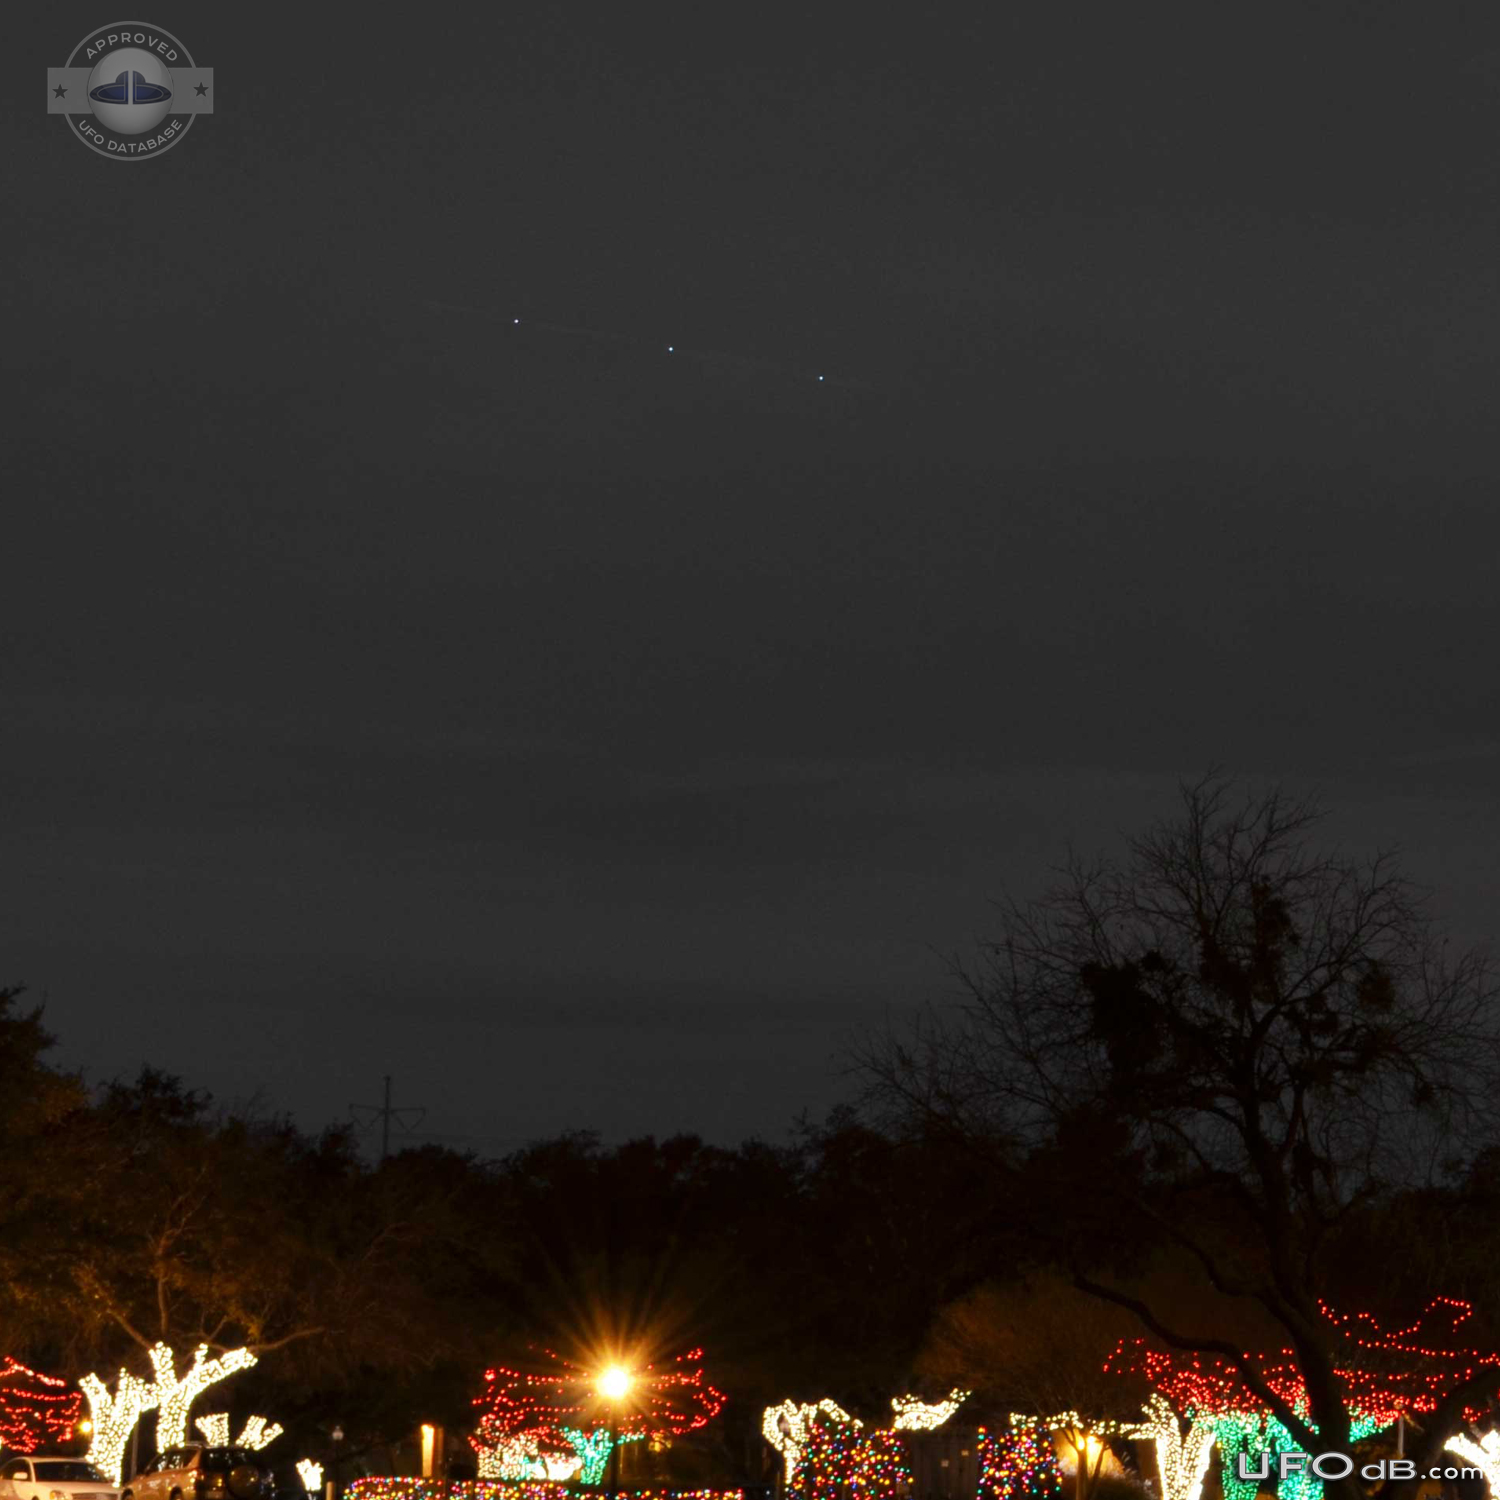 UFOs are showing on 2011 Christmas pictures - Dallas, Texas - 2011 UFO Picture #390-3